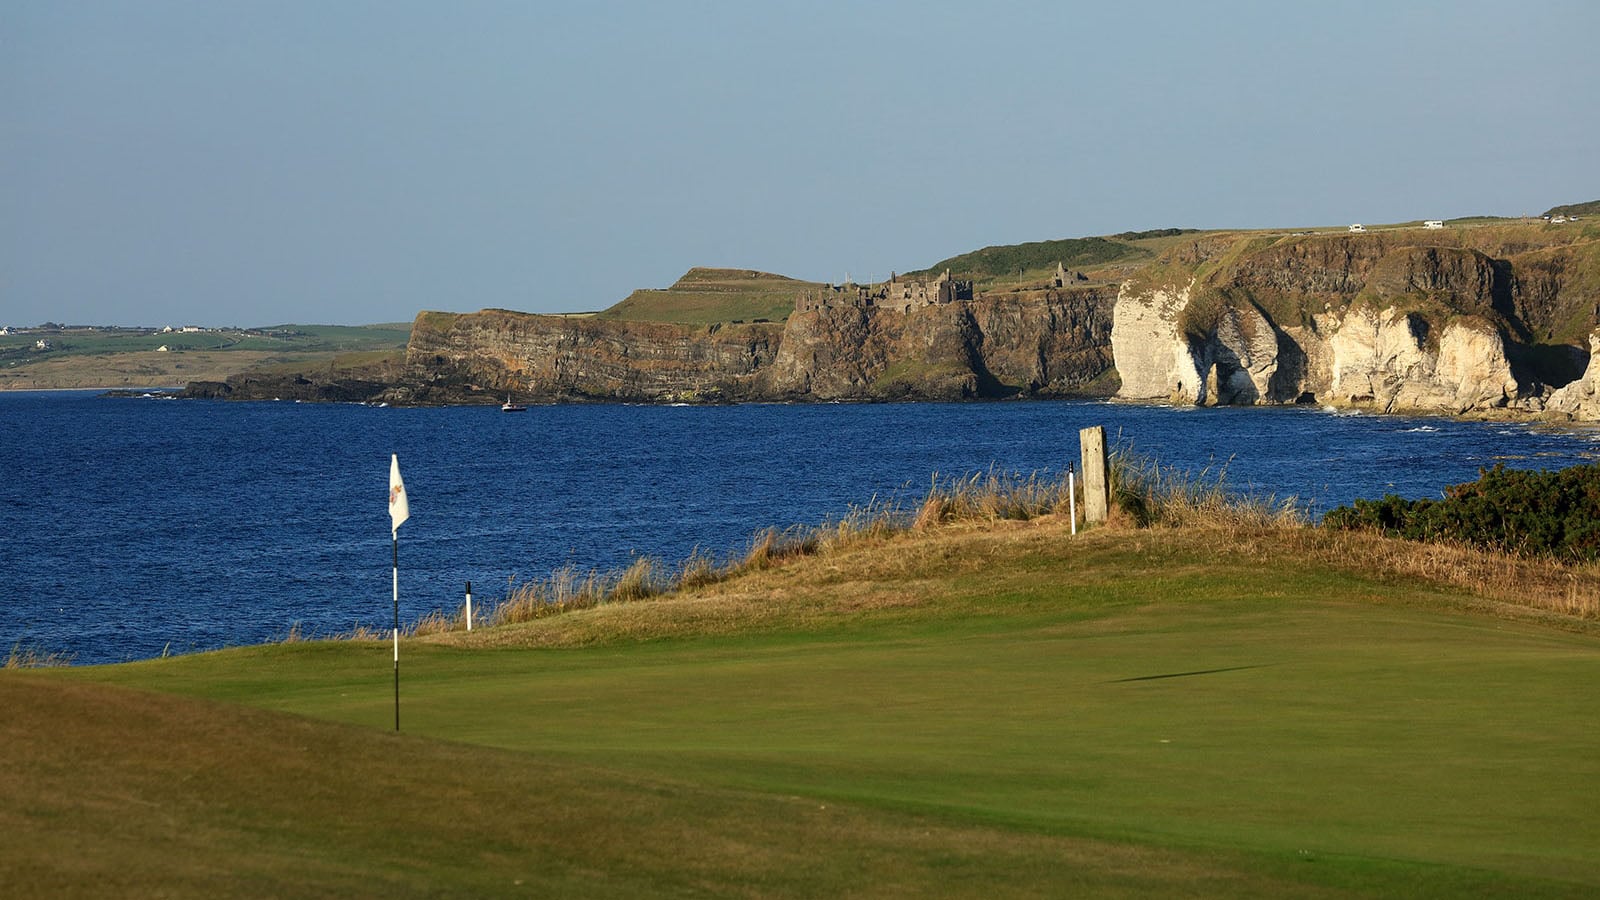 Image of the 6th green and distant Dunluce Castle ruins at Royal Portrush Dunluce Golf Course, Portrush, County Antrim, Northern Ireland